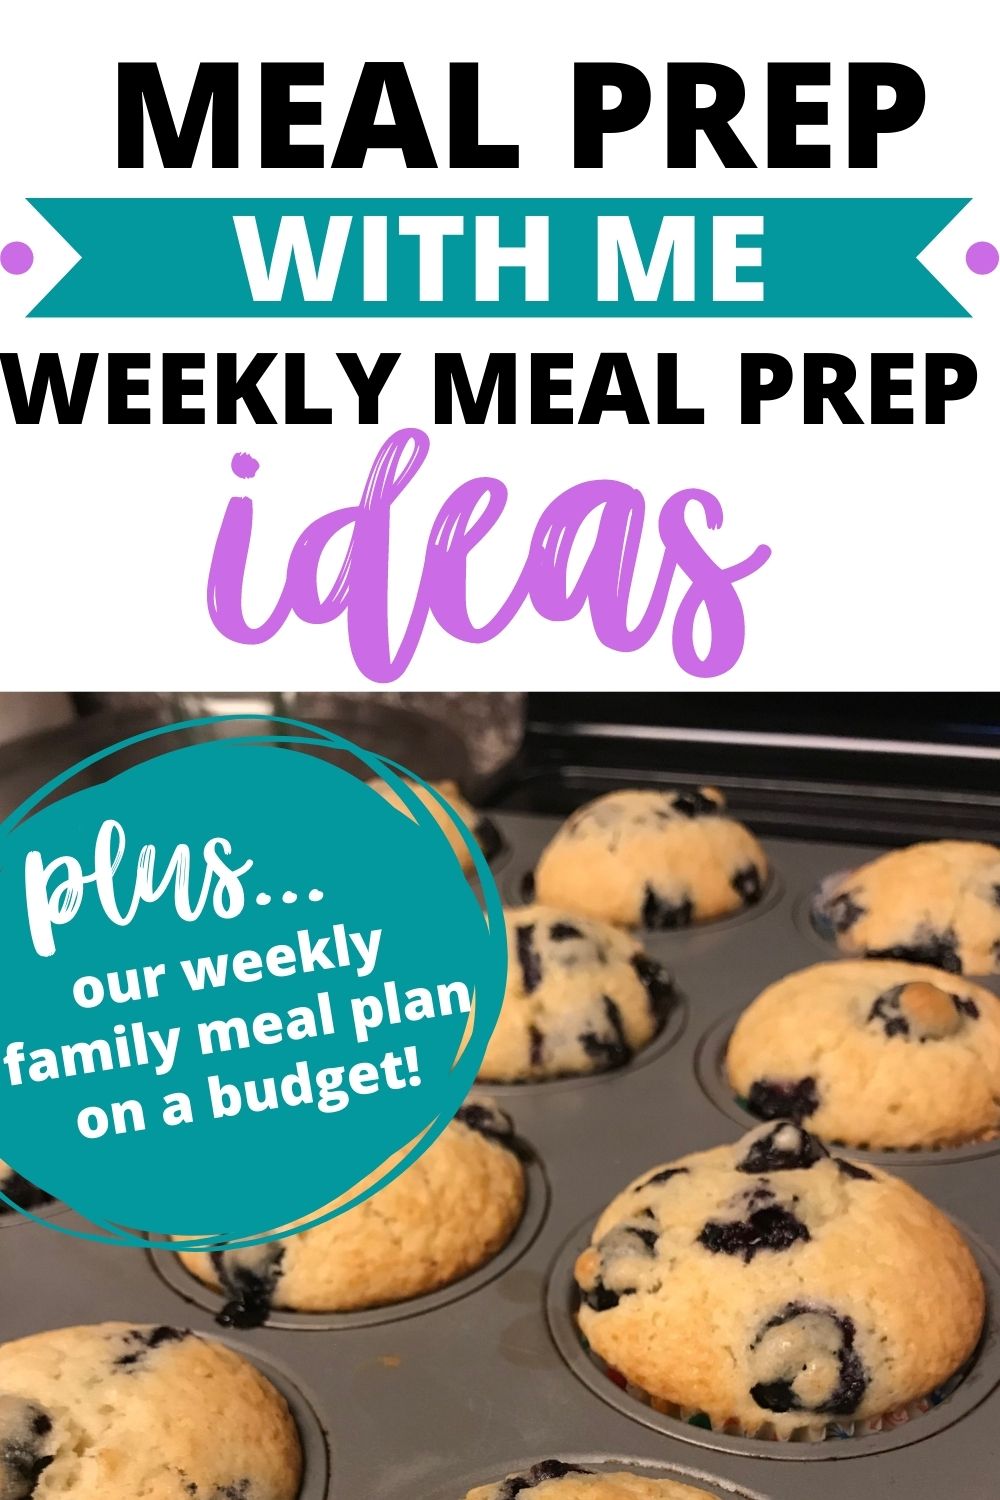 Our $100 Weekly Meal Plan For A Family Of 5 + Weekly Meal Prep Ideas